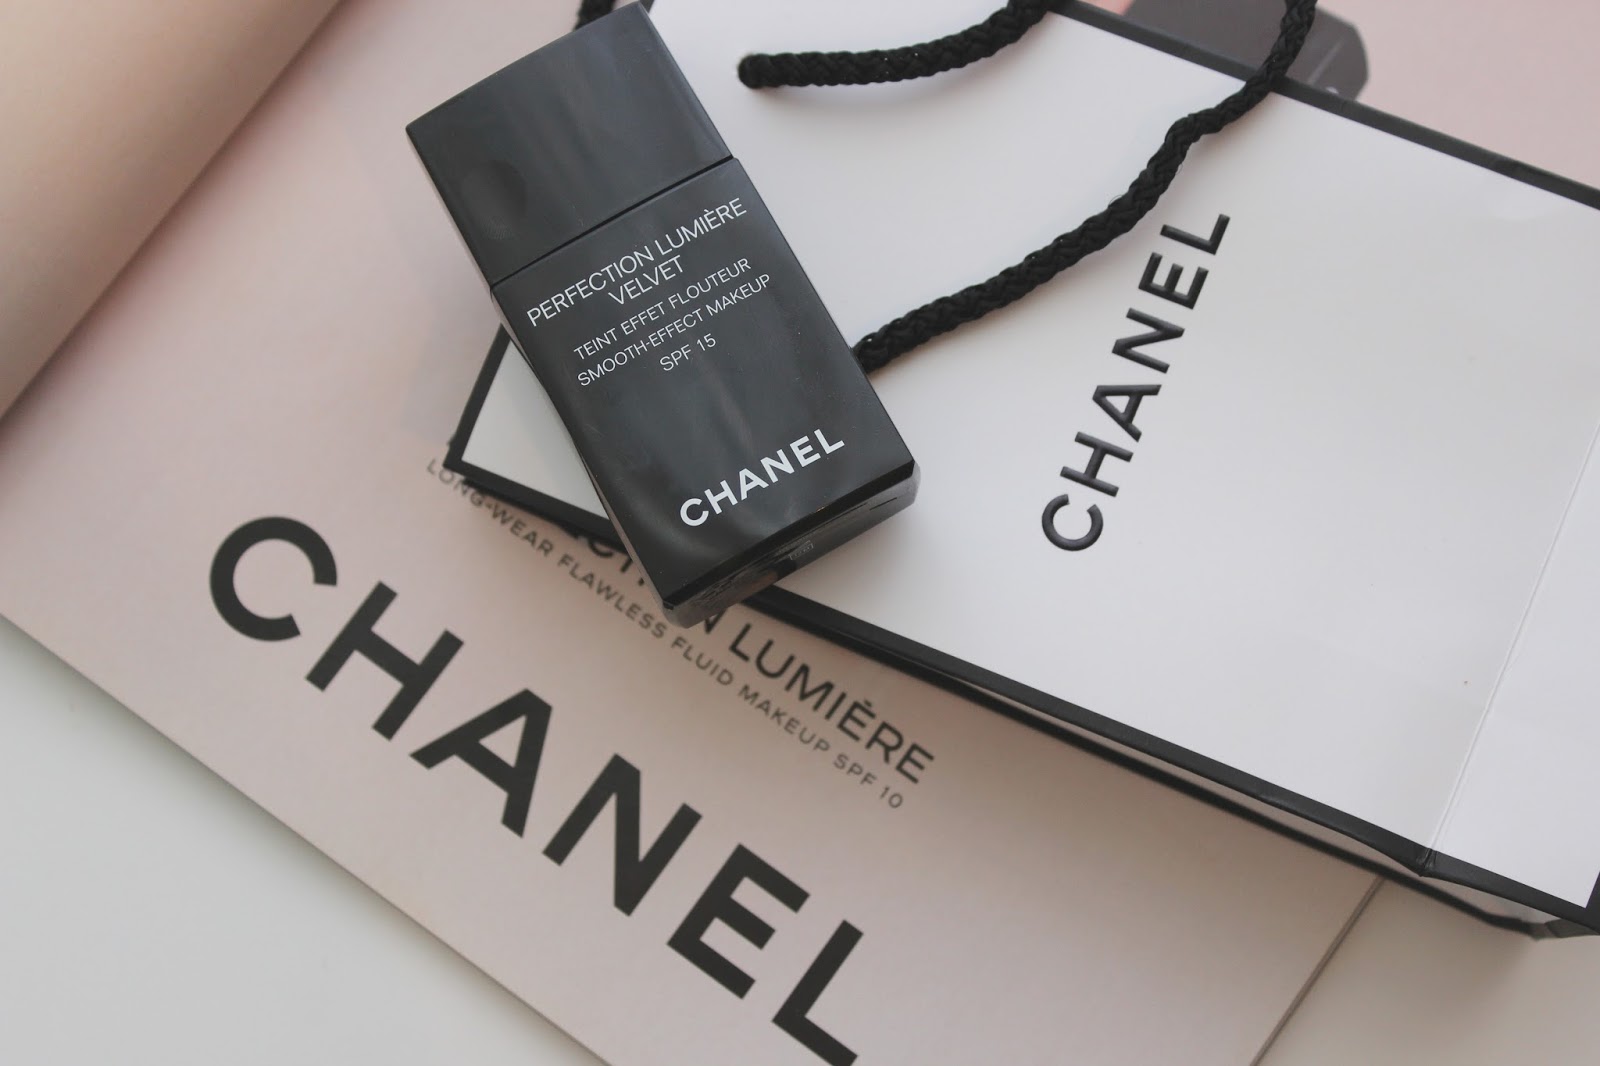 chanel perfection lumiere velvet smooth effect